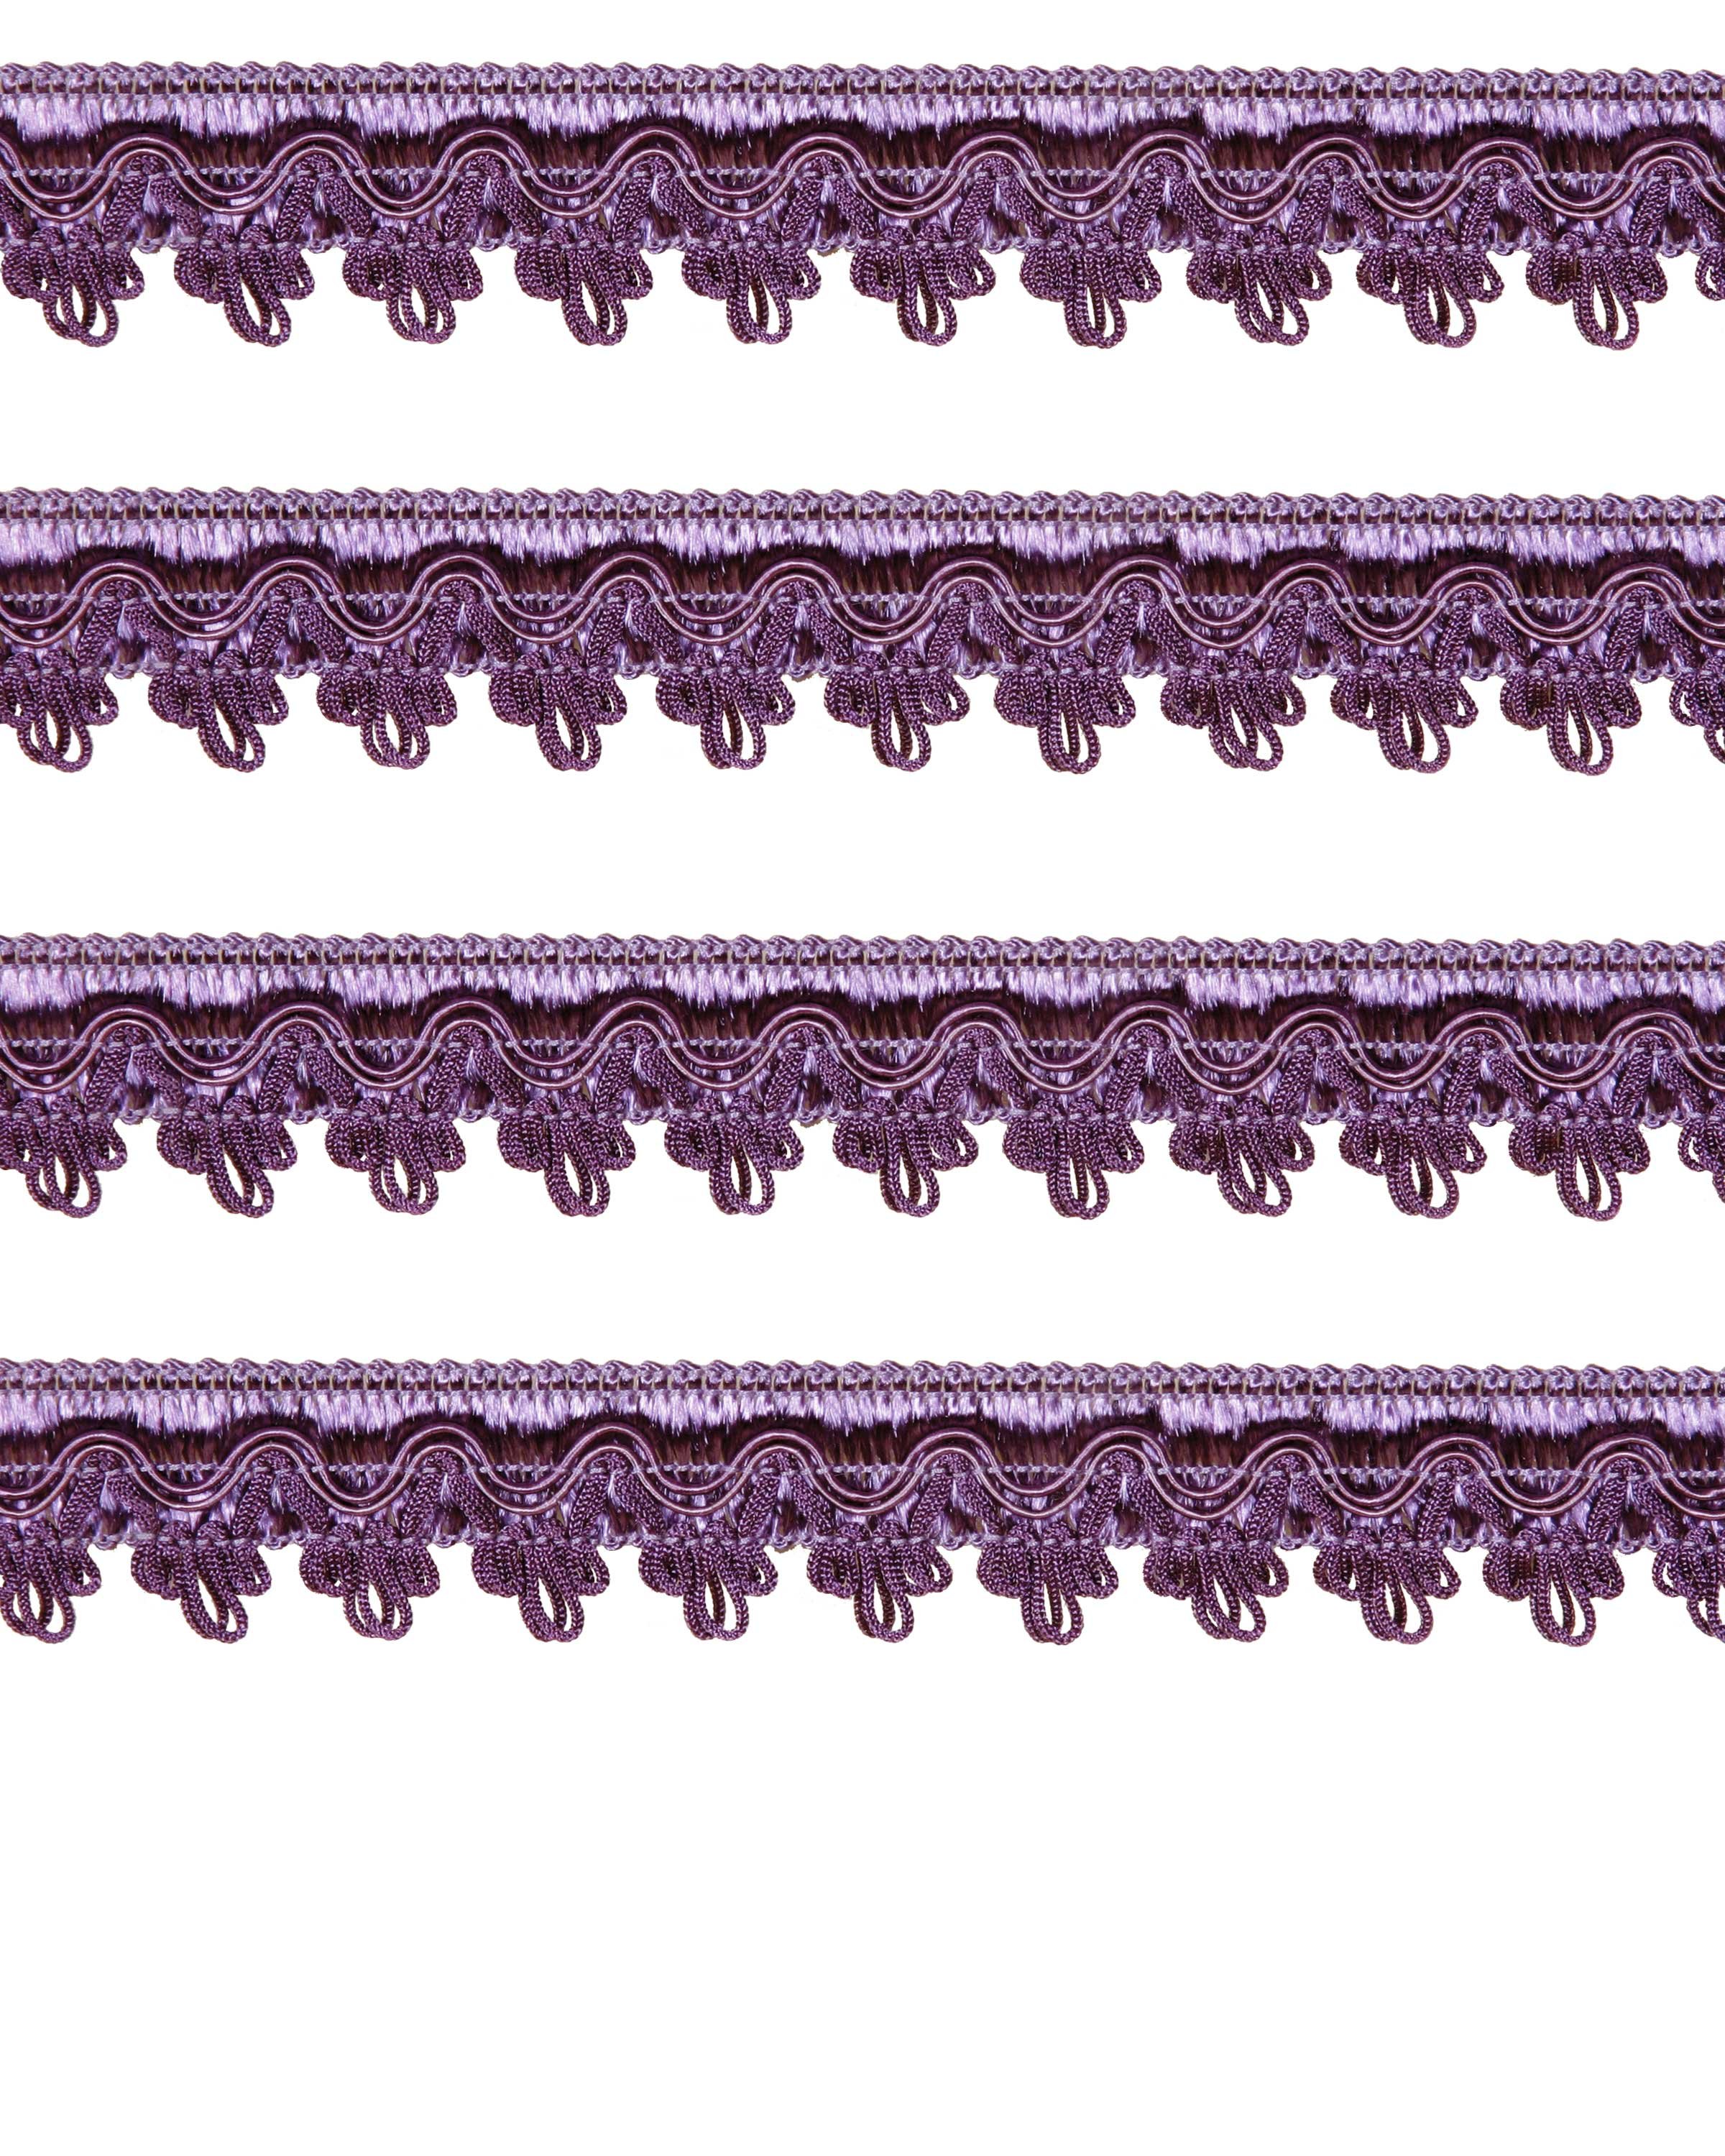 Fancy Braid - Mauve 27mm Price is for 5 metres